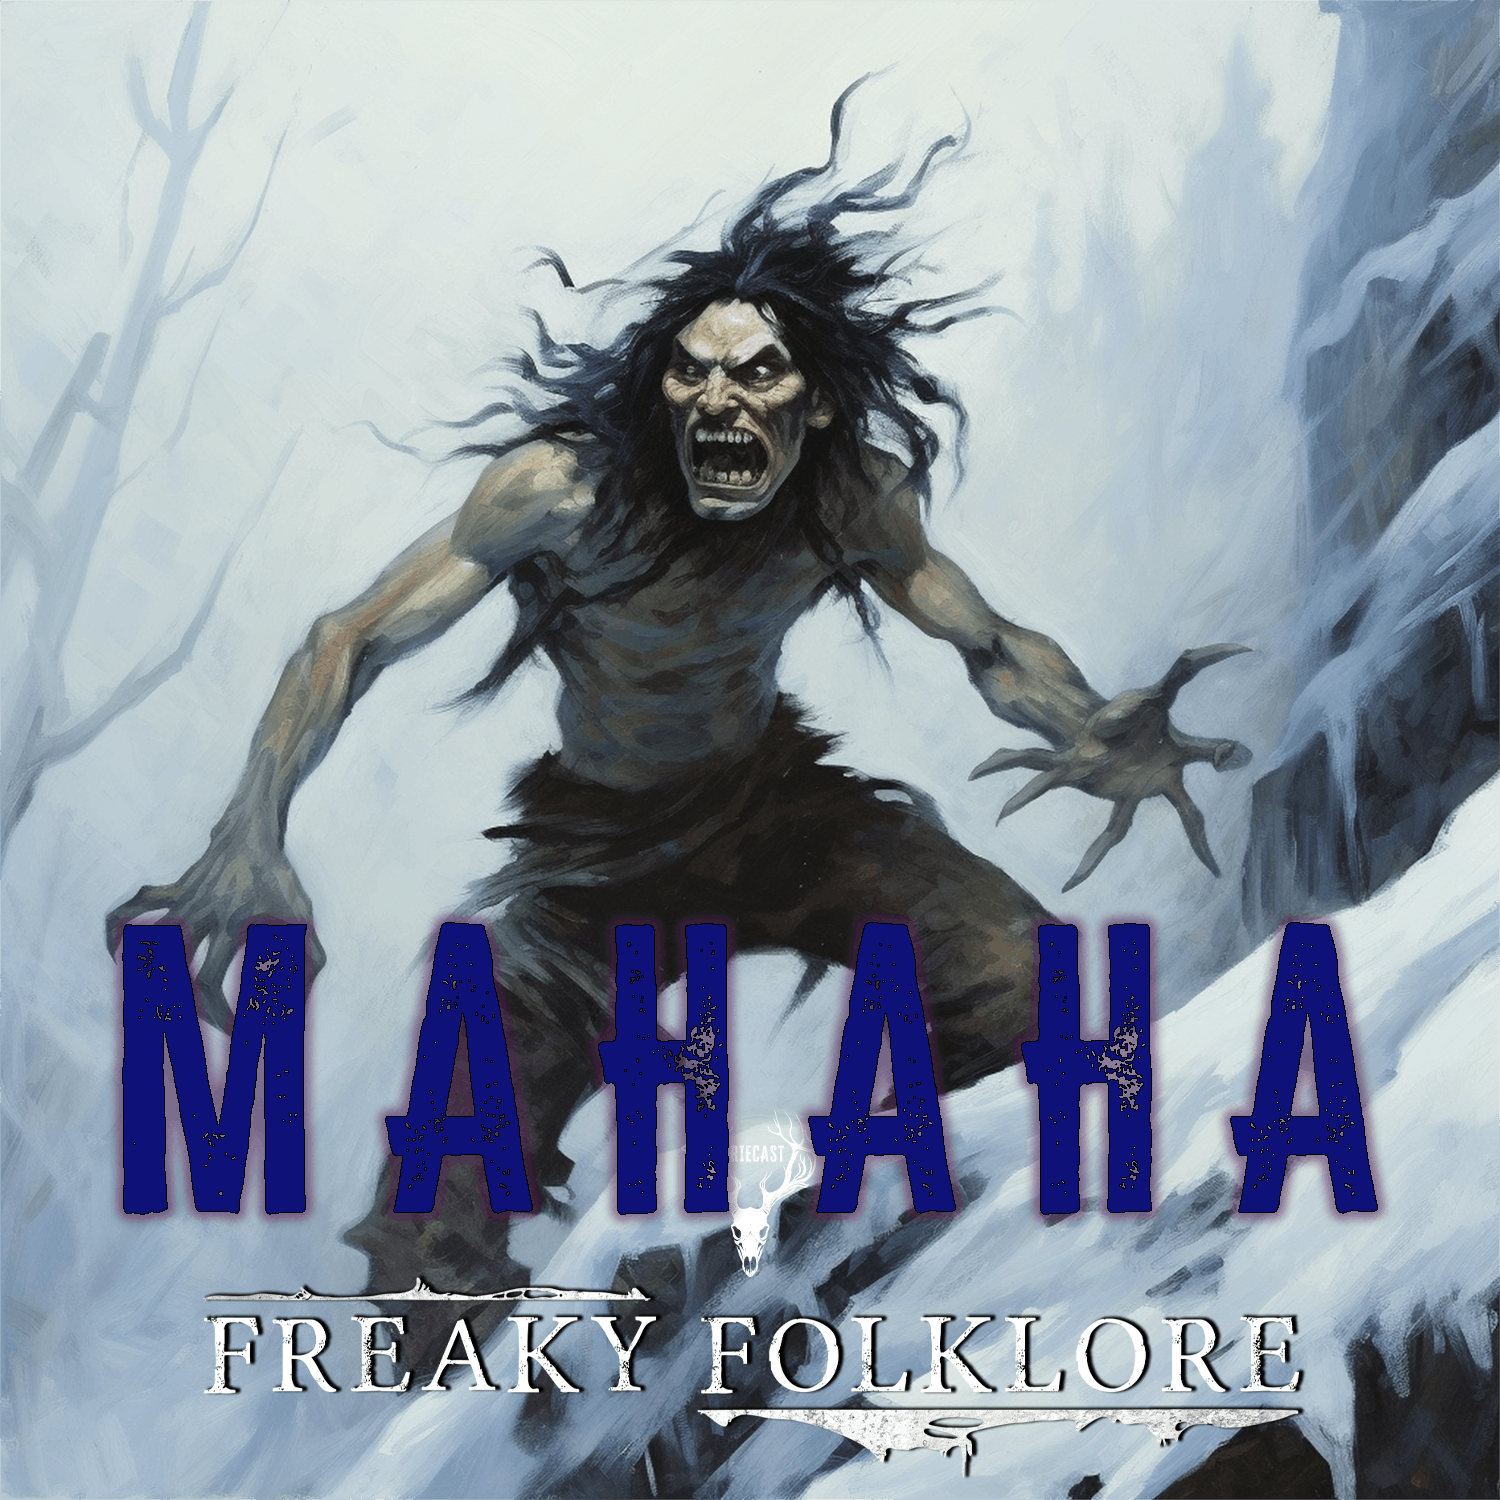 Mahaha - The Laughing Demon from Inuit Folklore